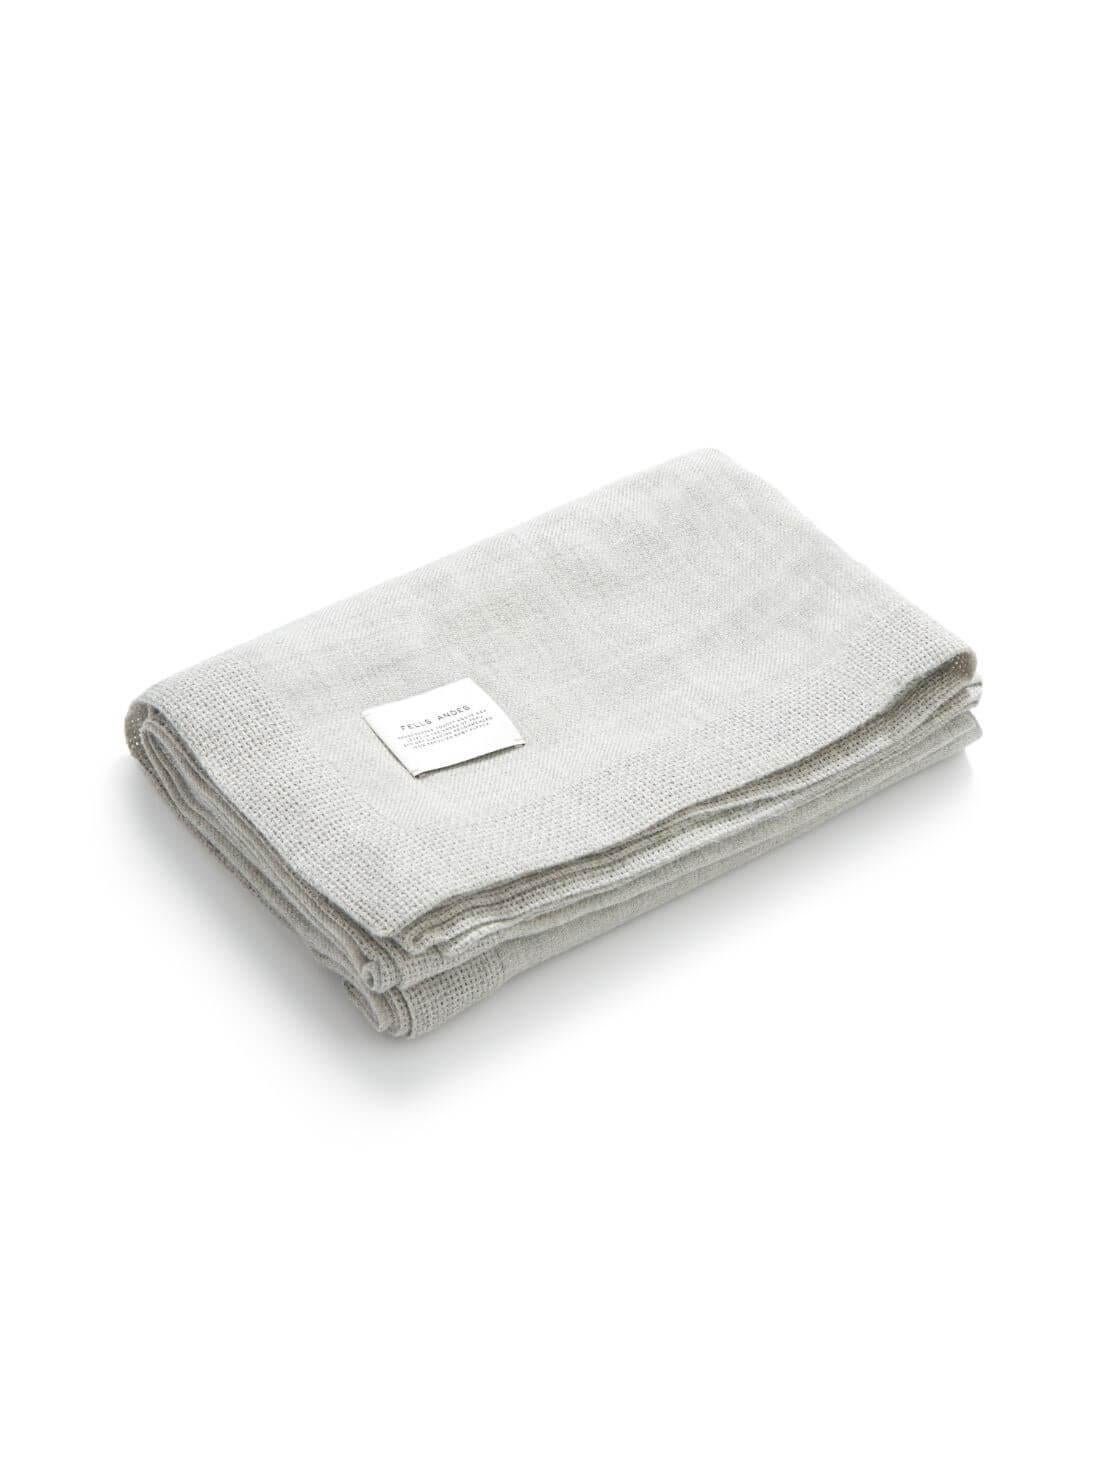 American Ande Throw, Grey 100% Baby Alpaca by Fells Andes  (FREE SHIPPING) For Sale